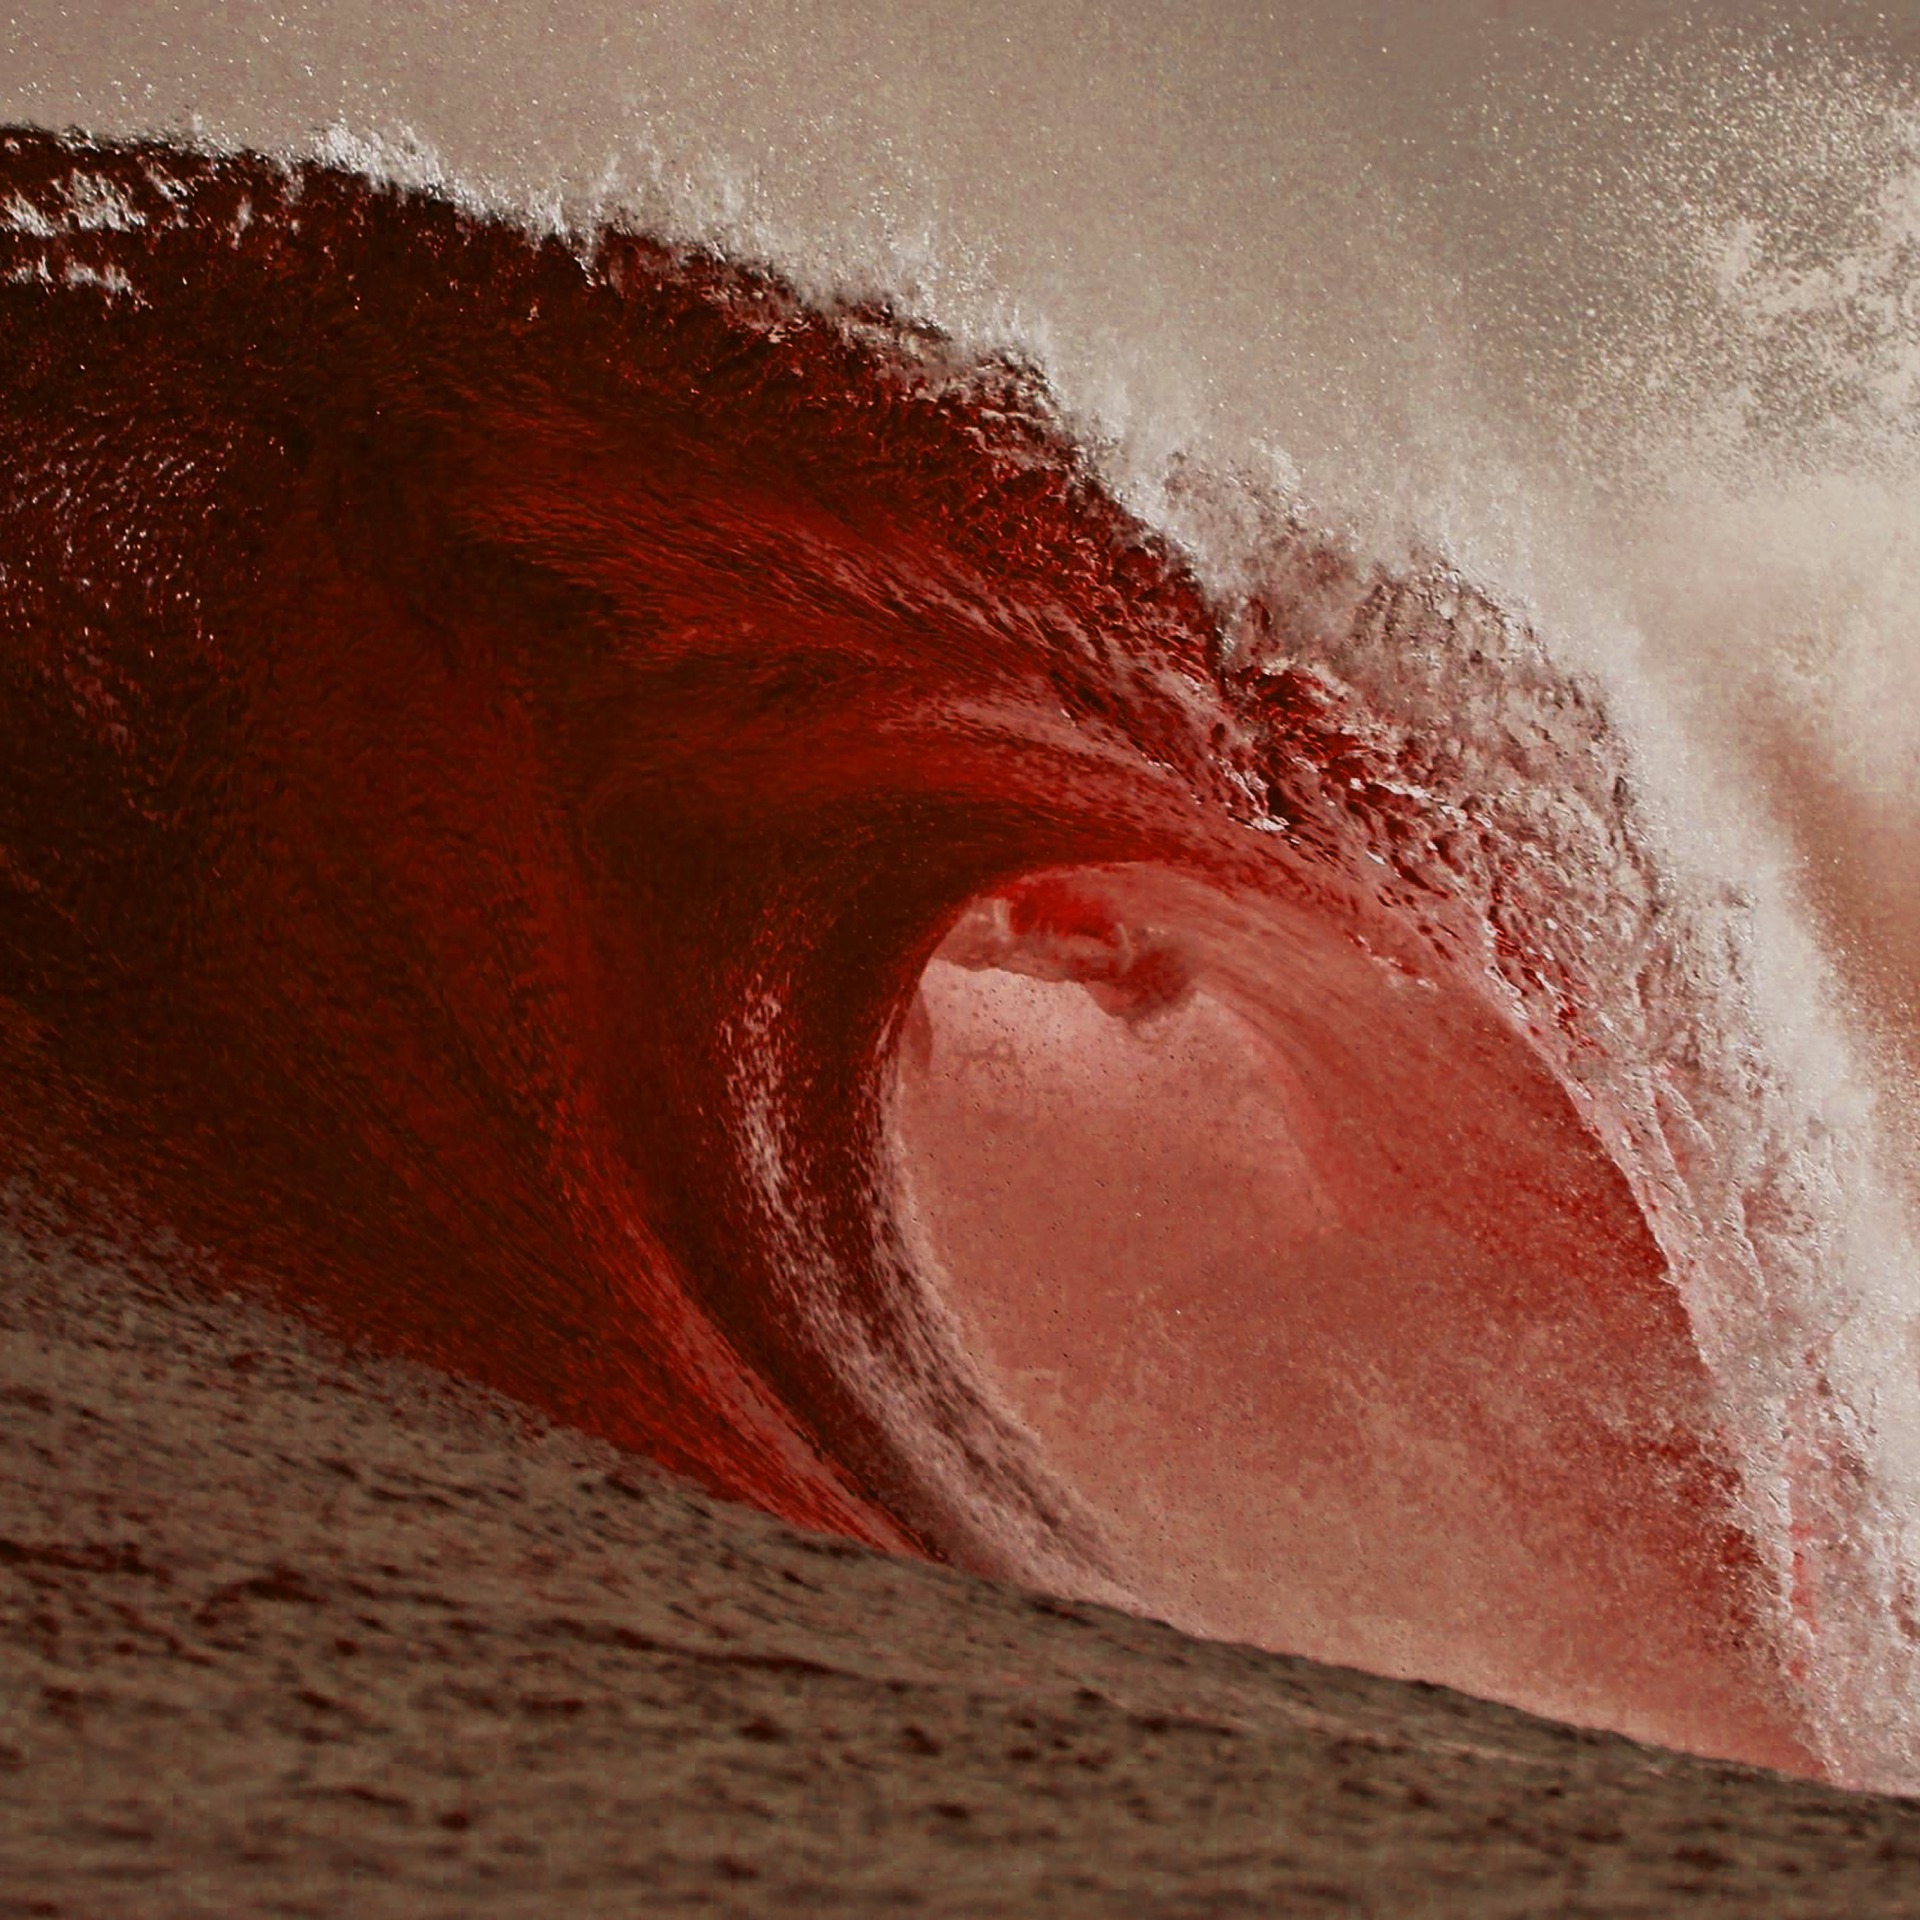 Red Wave Blank Meme Template